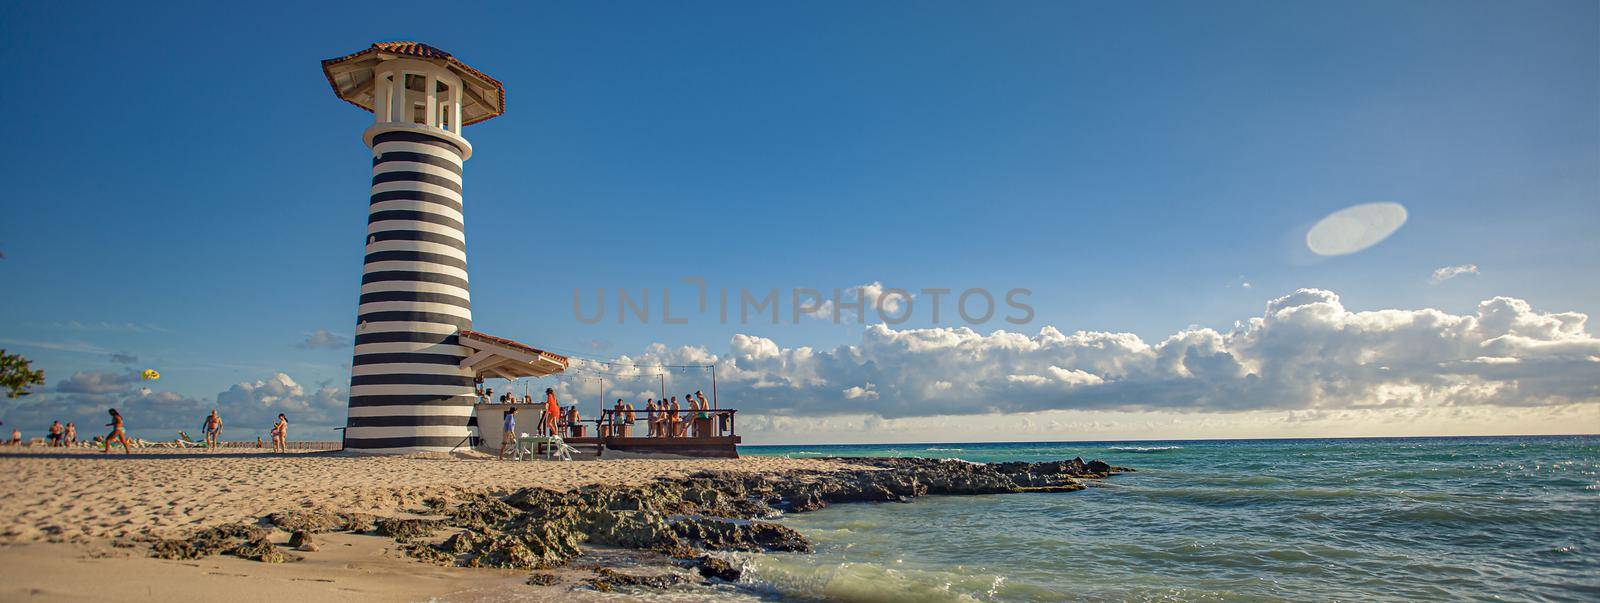 Bayahibe lighthouse landscape, banner image with copy space